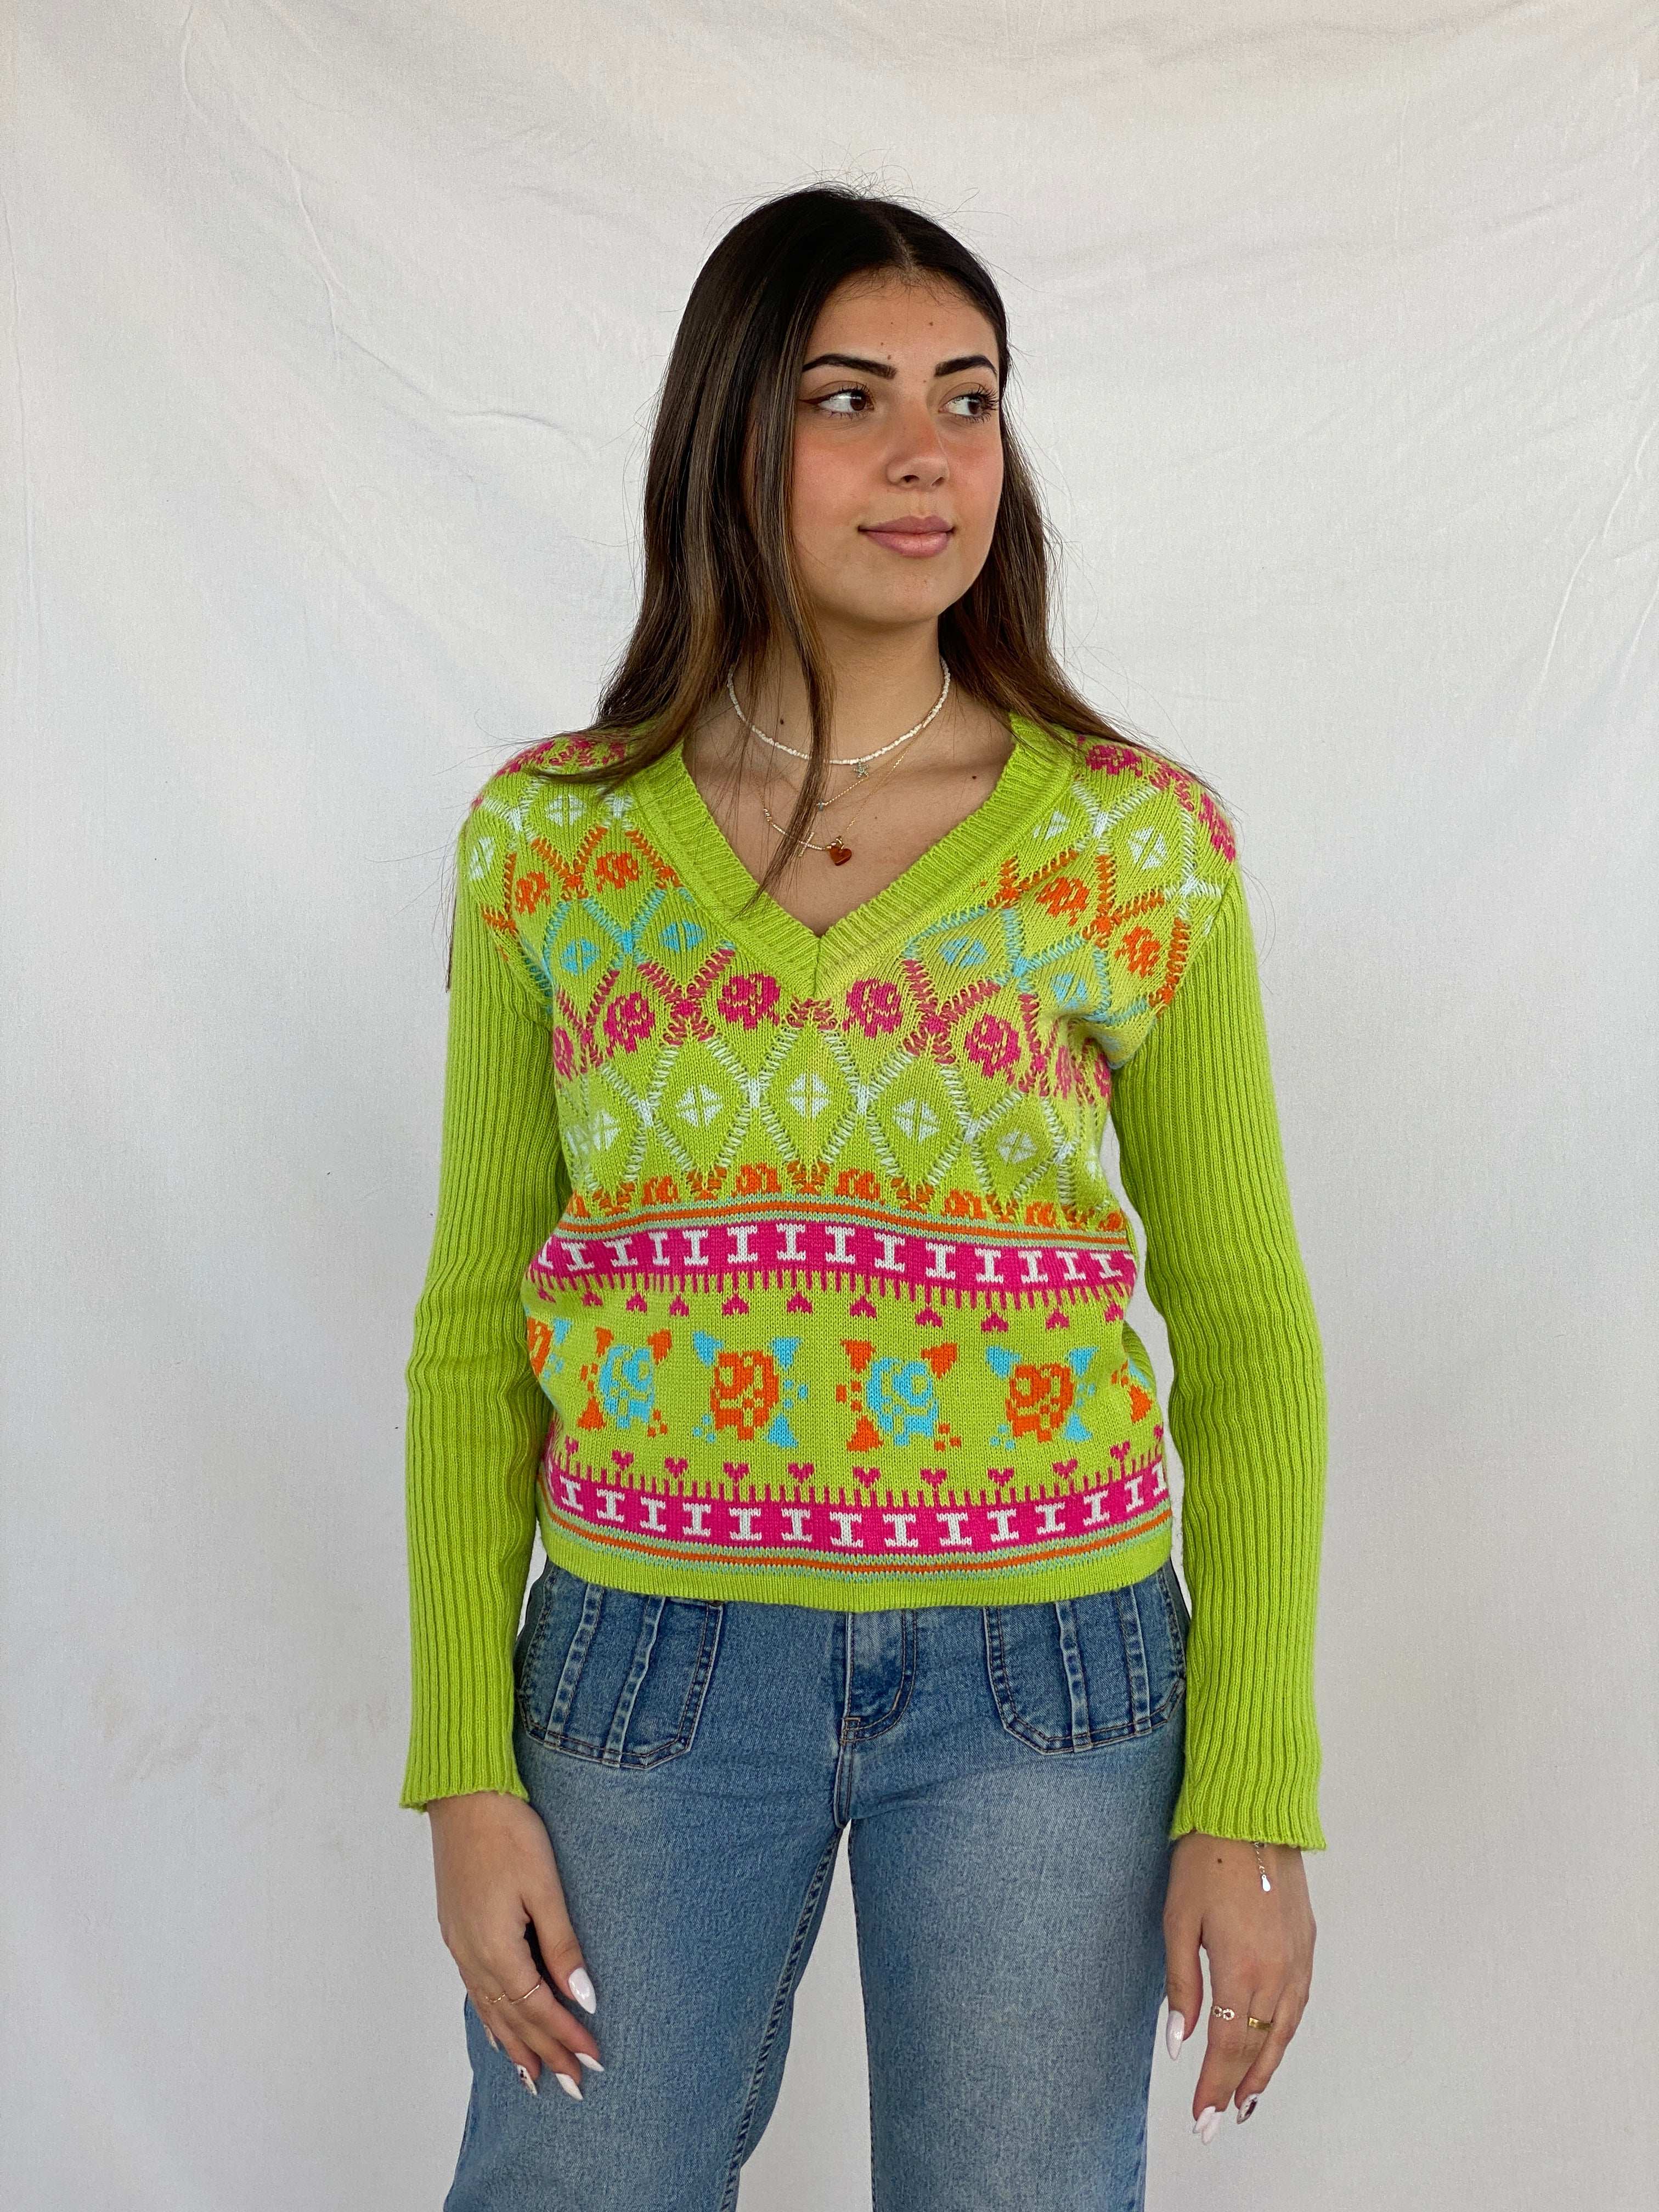 Vintage Sev-kut Collection Knitted Top - Balagan Vintage Full Sleeve Top 00s, 90s, Juana, NEW IN